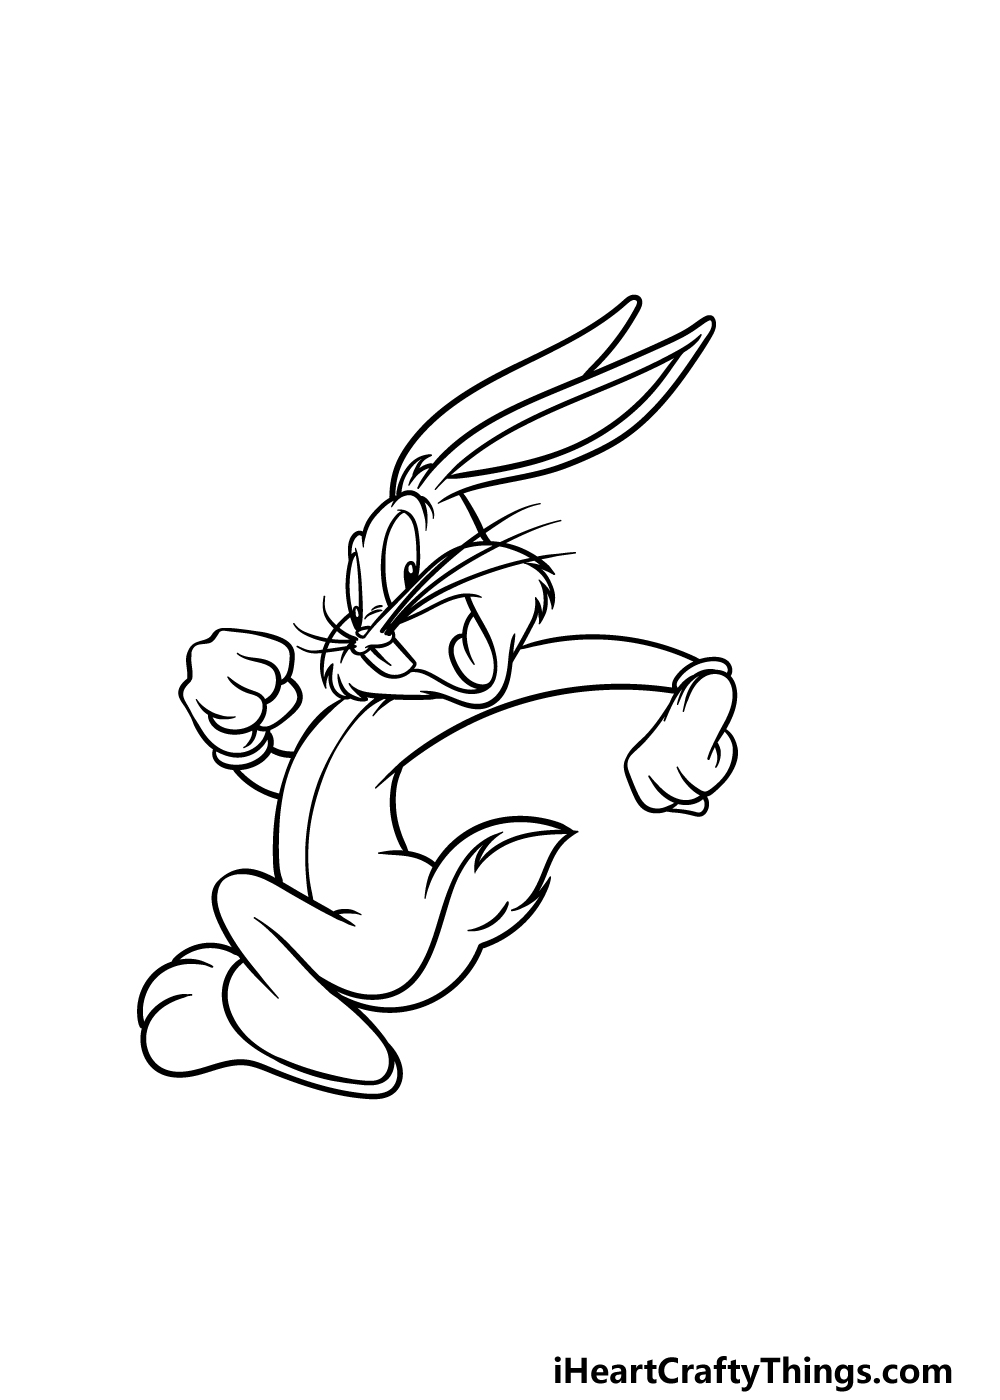 Bugs Bunny Drawing - How To Draw Bugs Bunny Step By Step